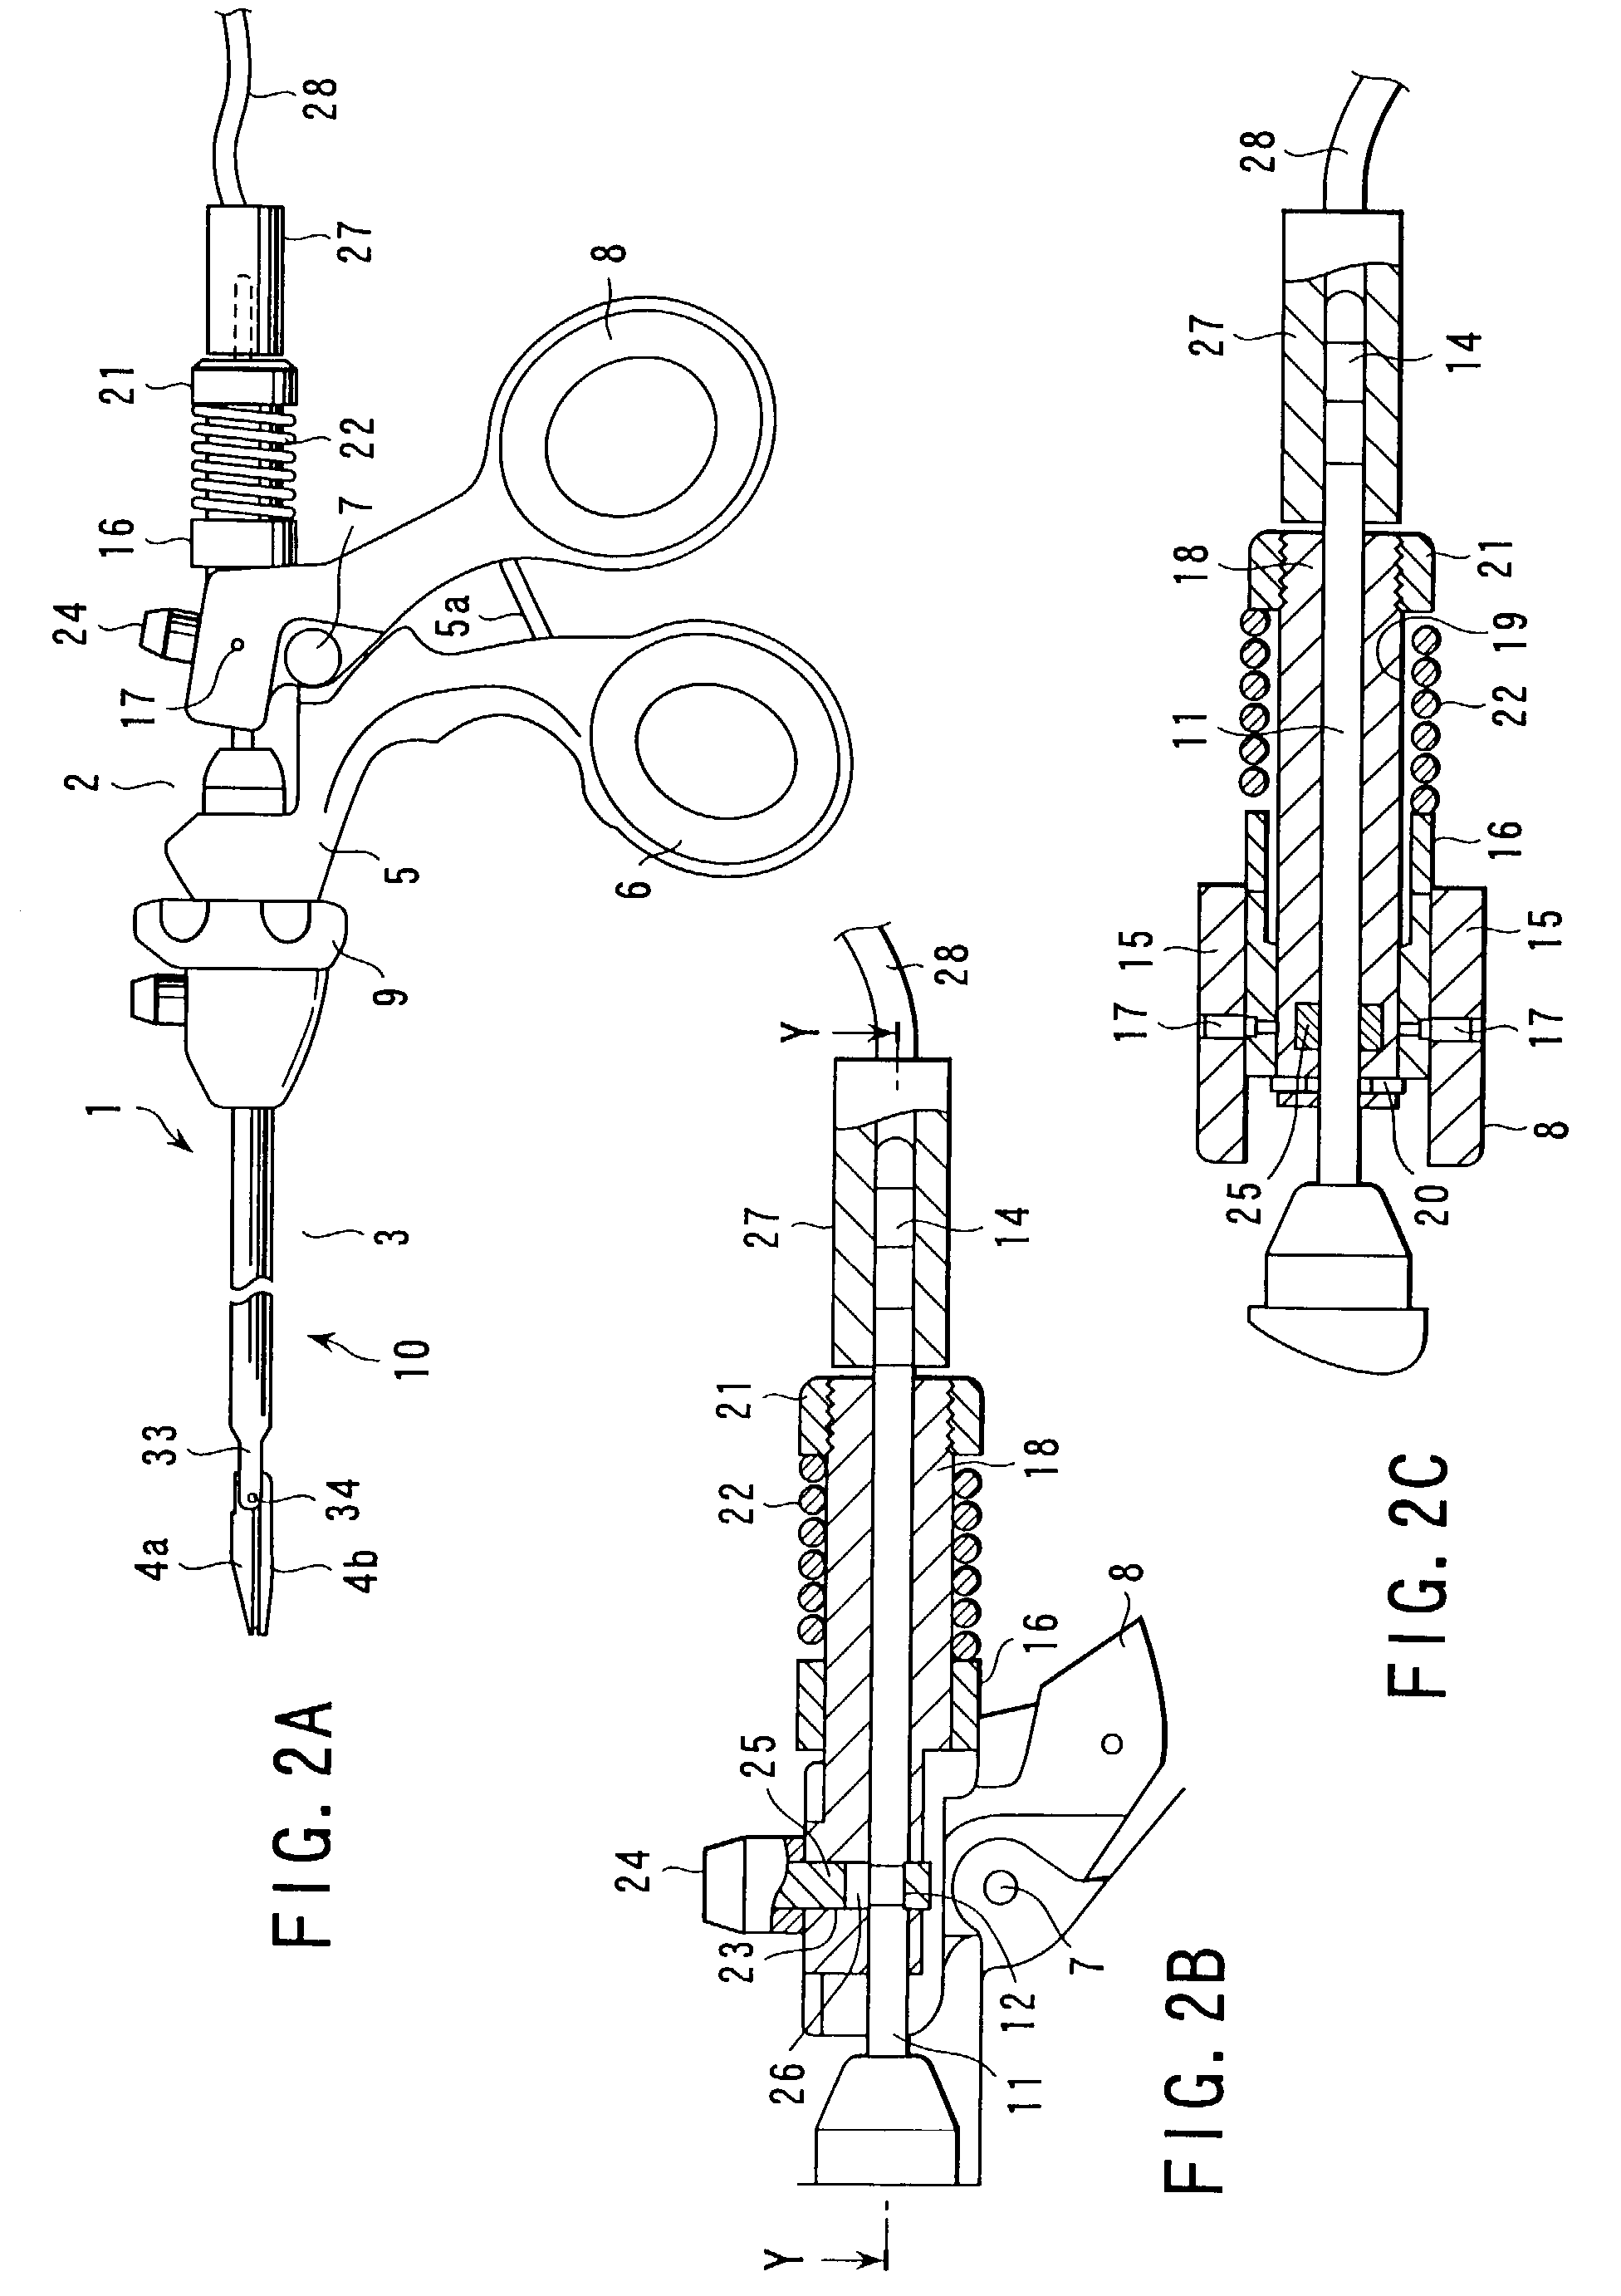 Treatment device for tissue from living tissues